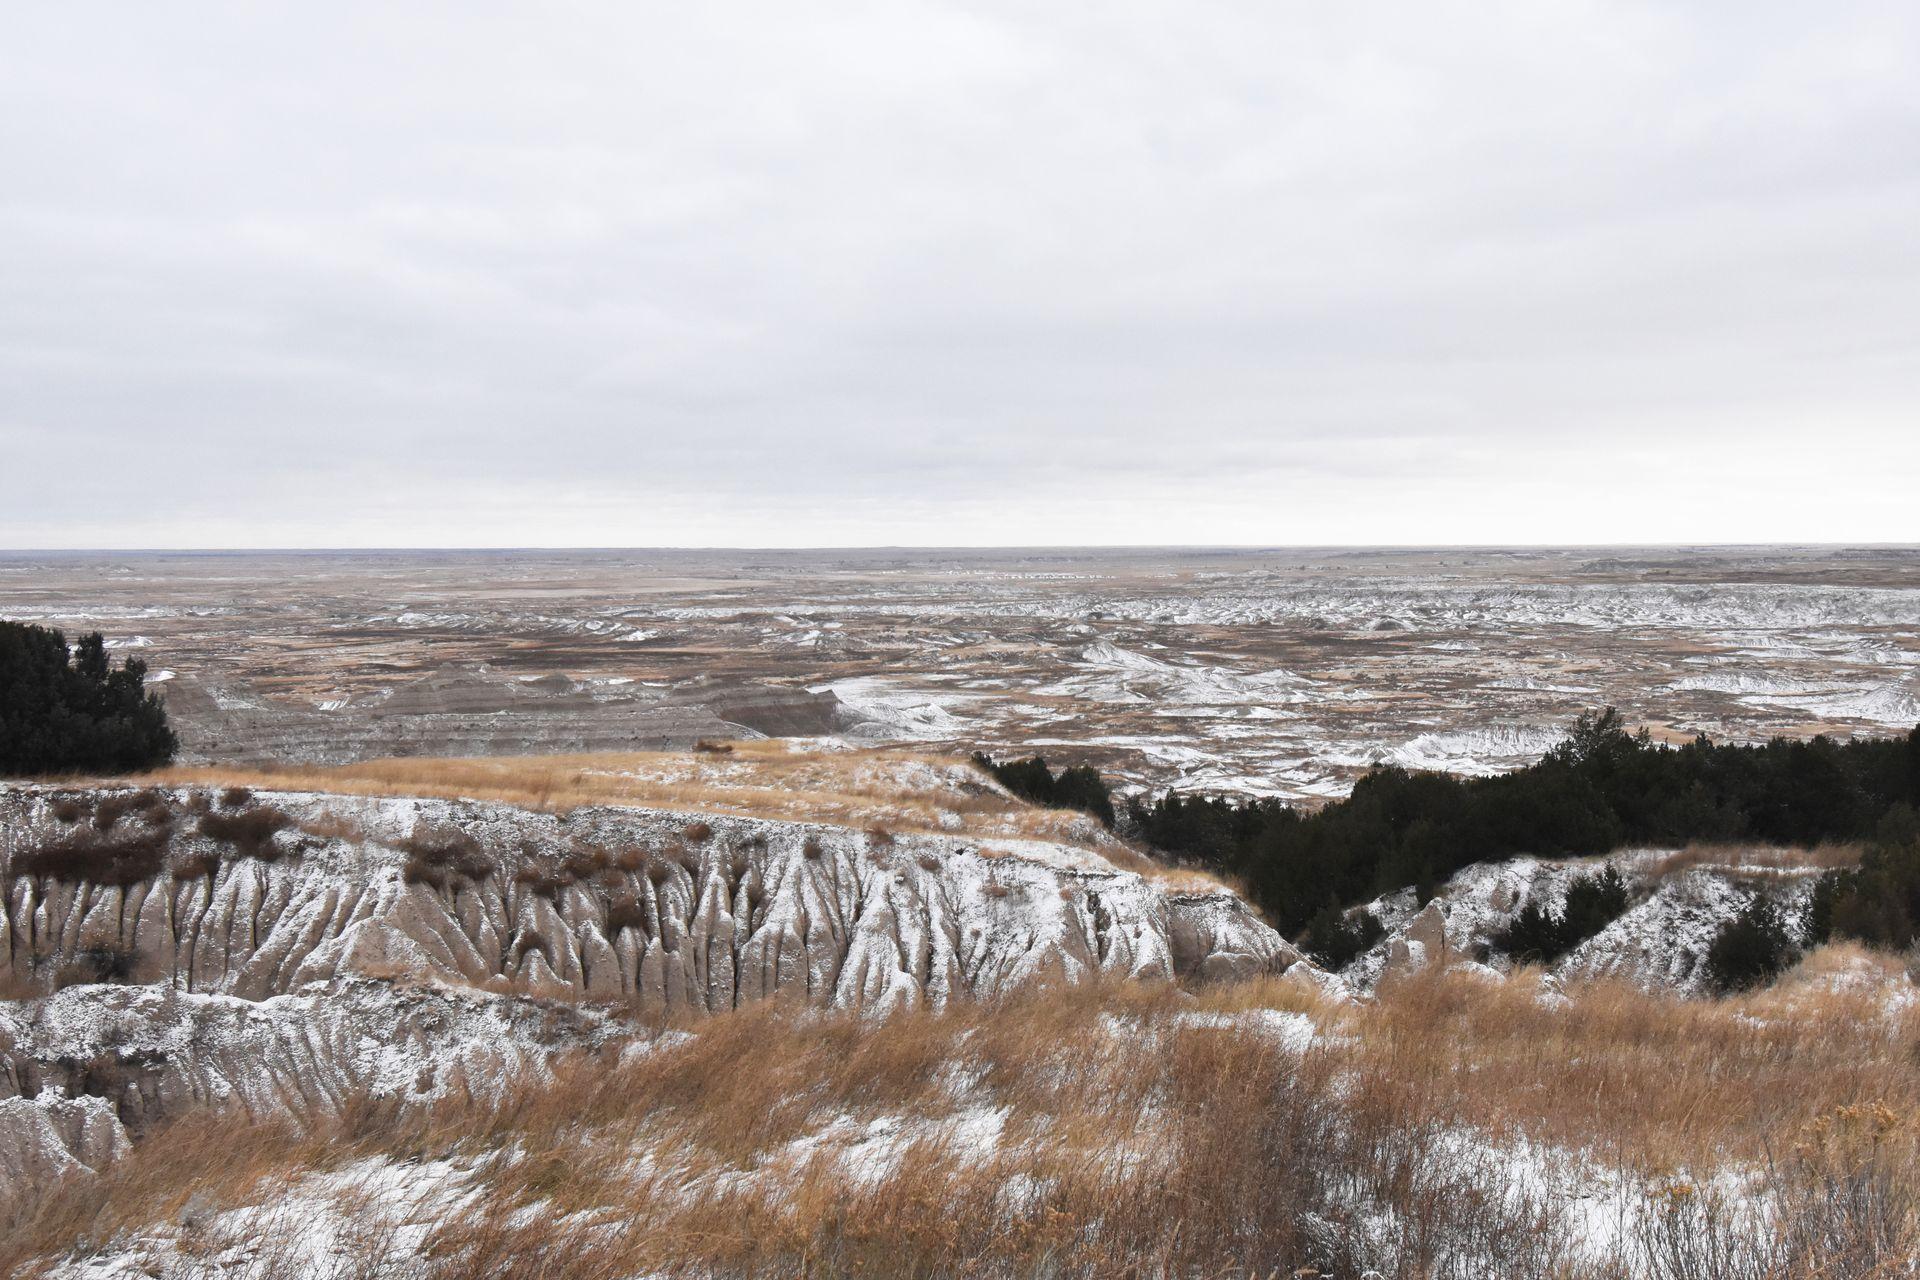 Looking out upon grasslands and badland rock formations from an overlook.